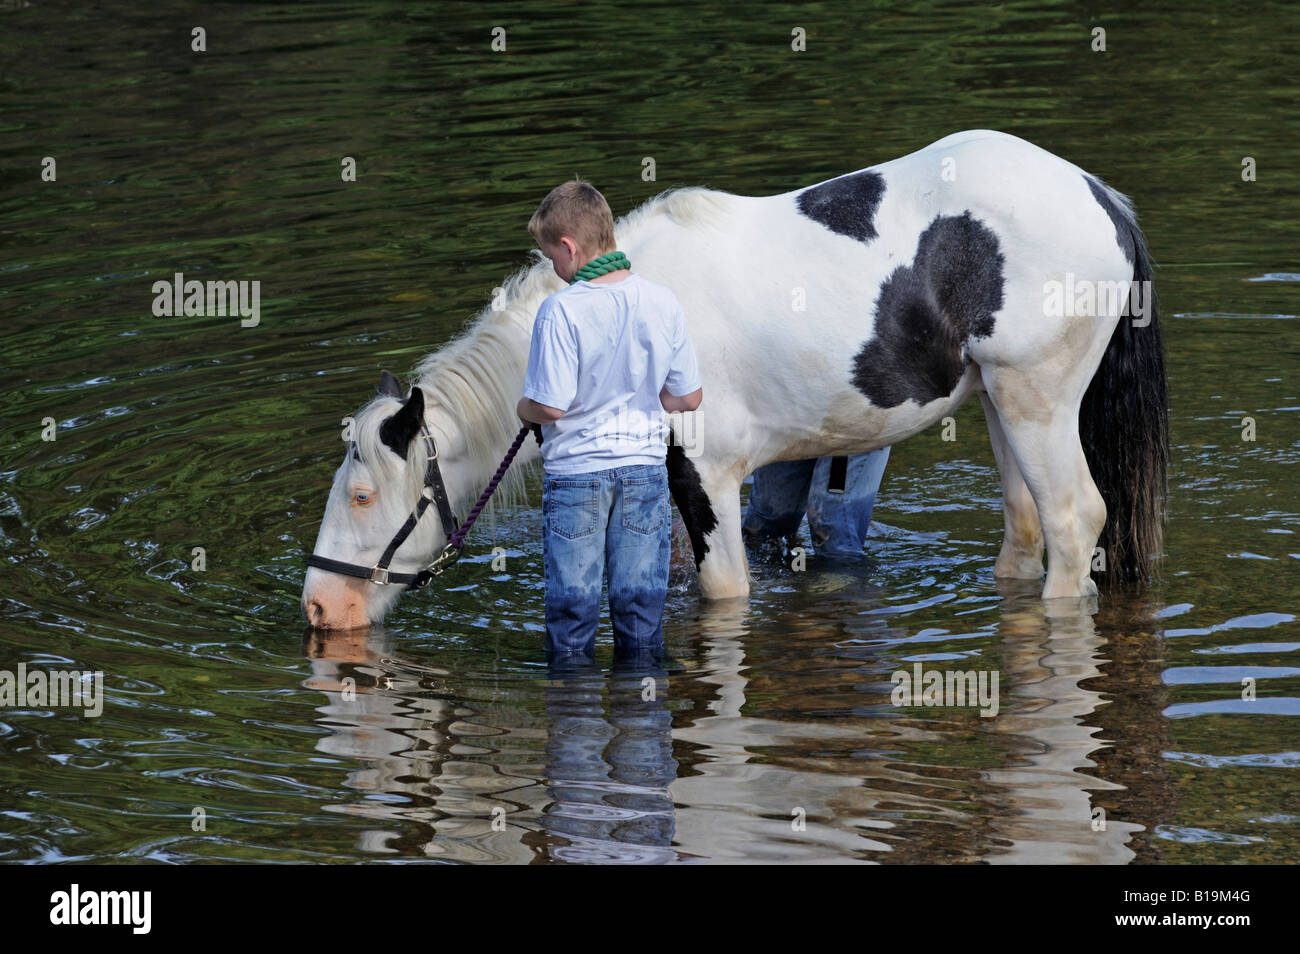 Gypsy traveller boys with coloured cob in River Eden. Appleby Horse Fair. Appleby-in-Westmorland, Cumbria, England. Stock Photo